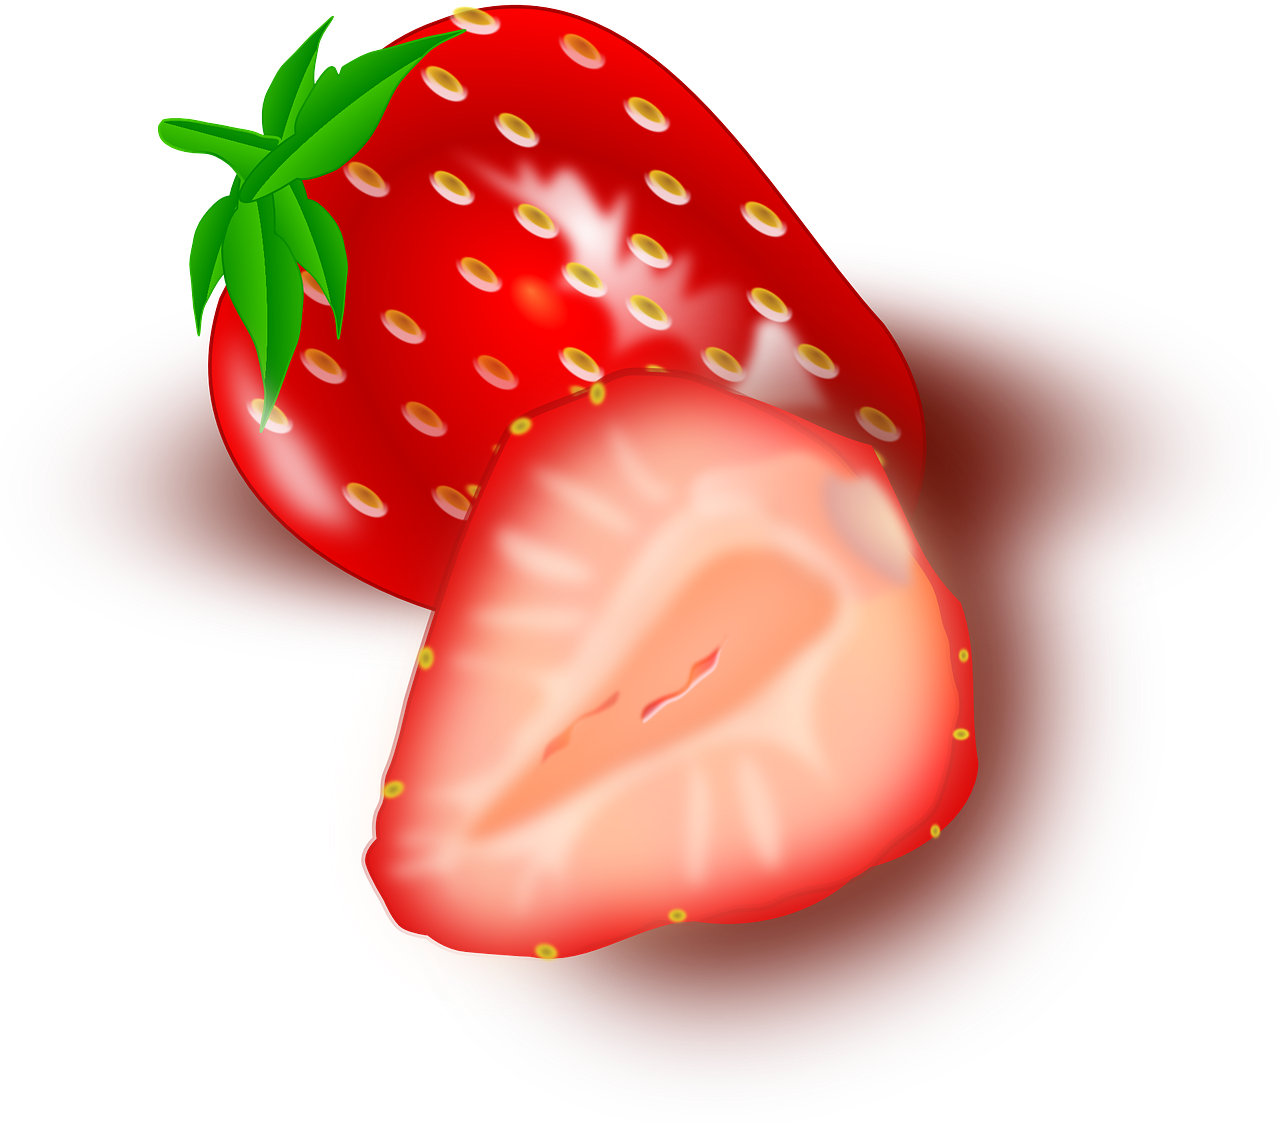 Image Result For Strawberry Decals/wraps For Cars - Strawberry Slice Vector (1280x1122)